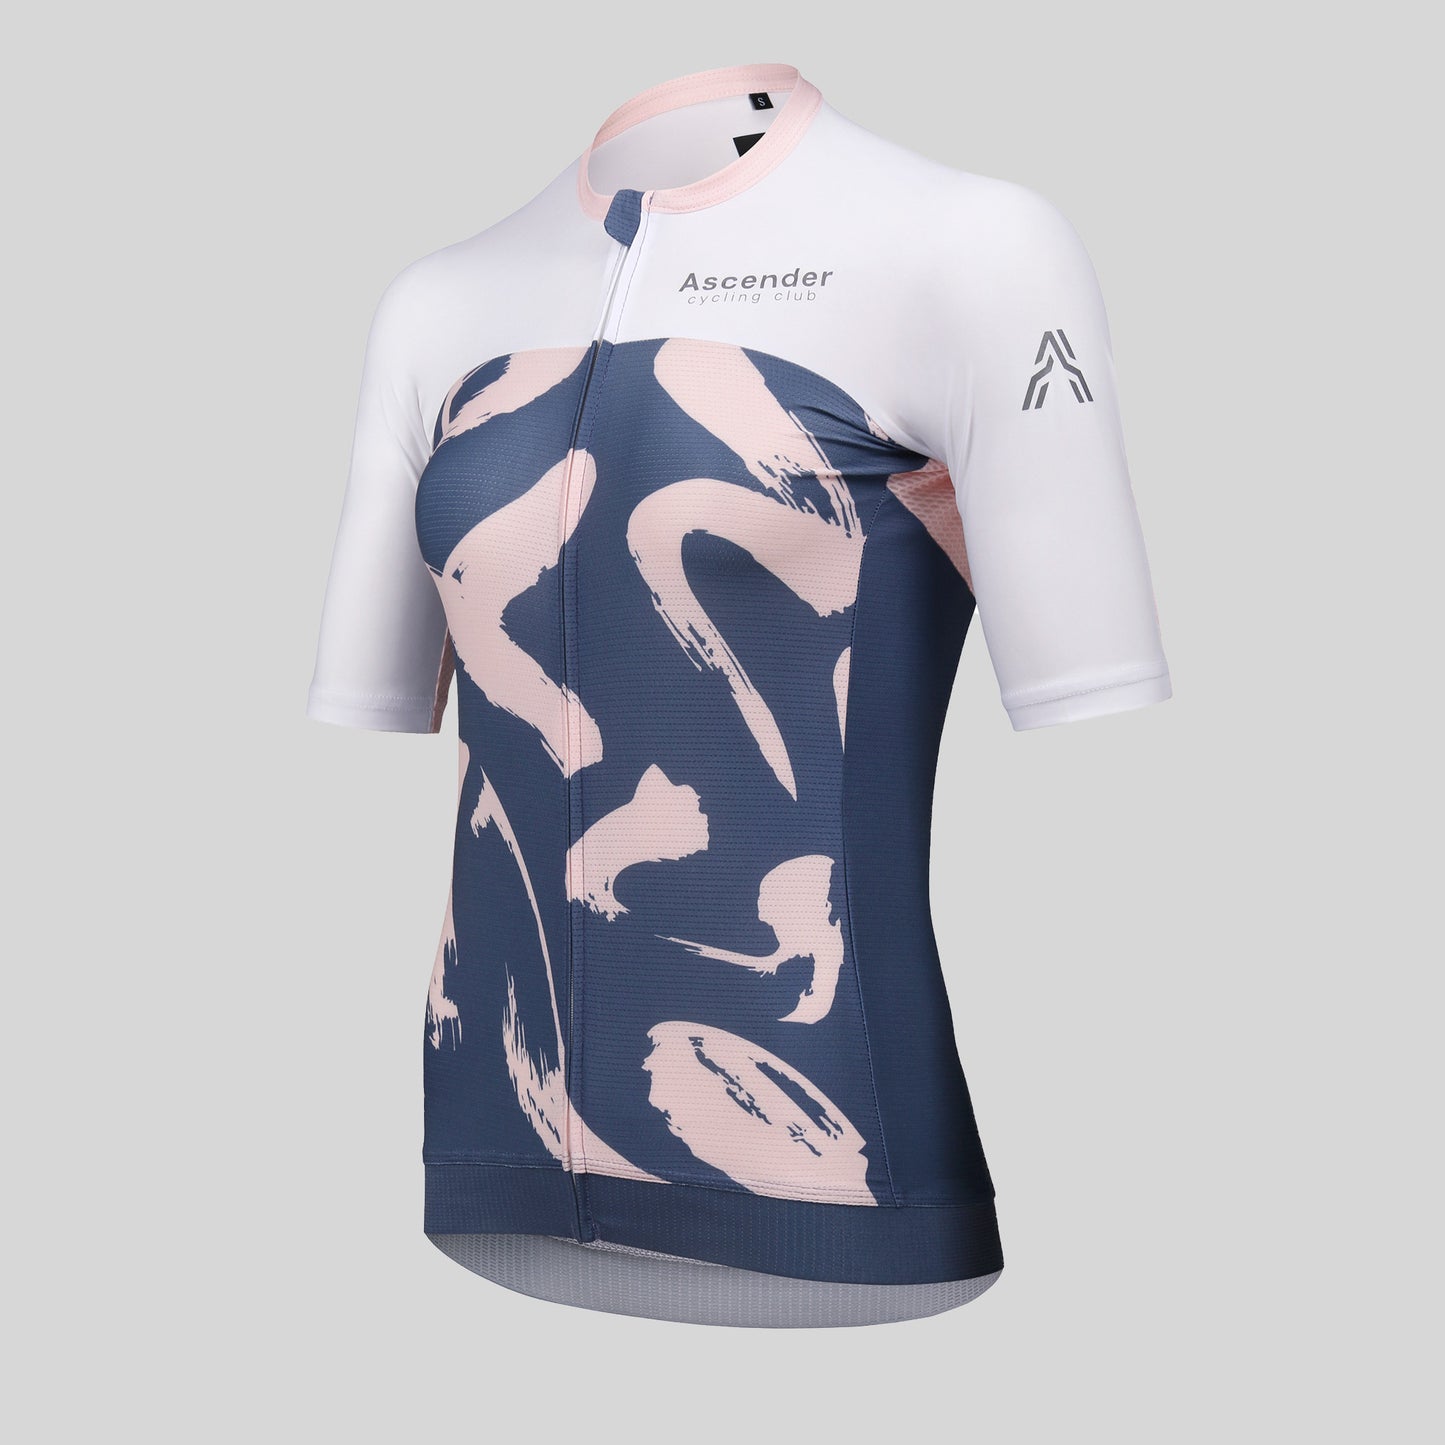 Yukimi Short Sleeve Jersey for Women by Ascender Cycling Club in Zürich Switzerland Picture Front with Monogram Ascender on Left Sleeve with Reflective Logo